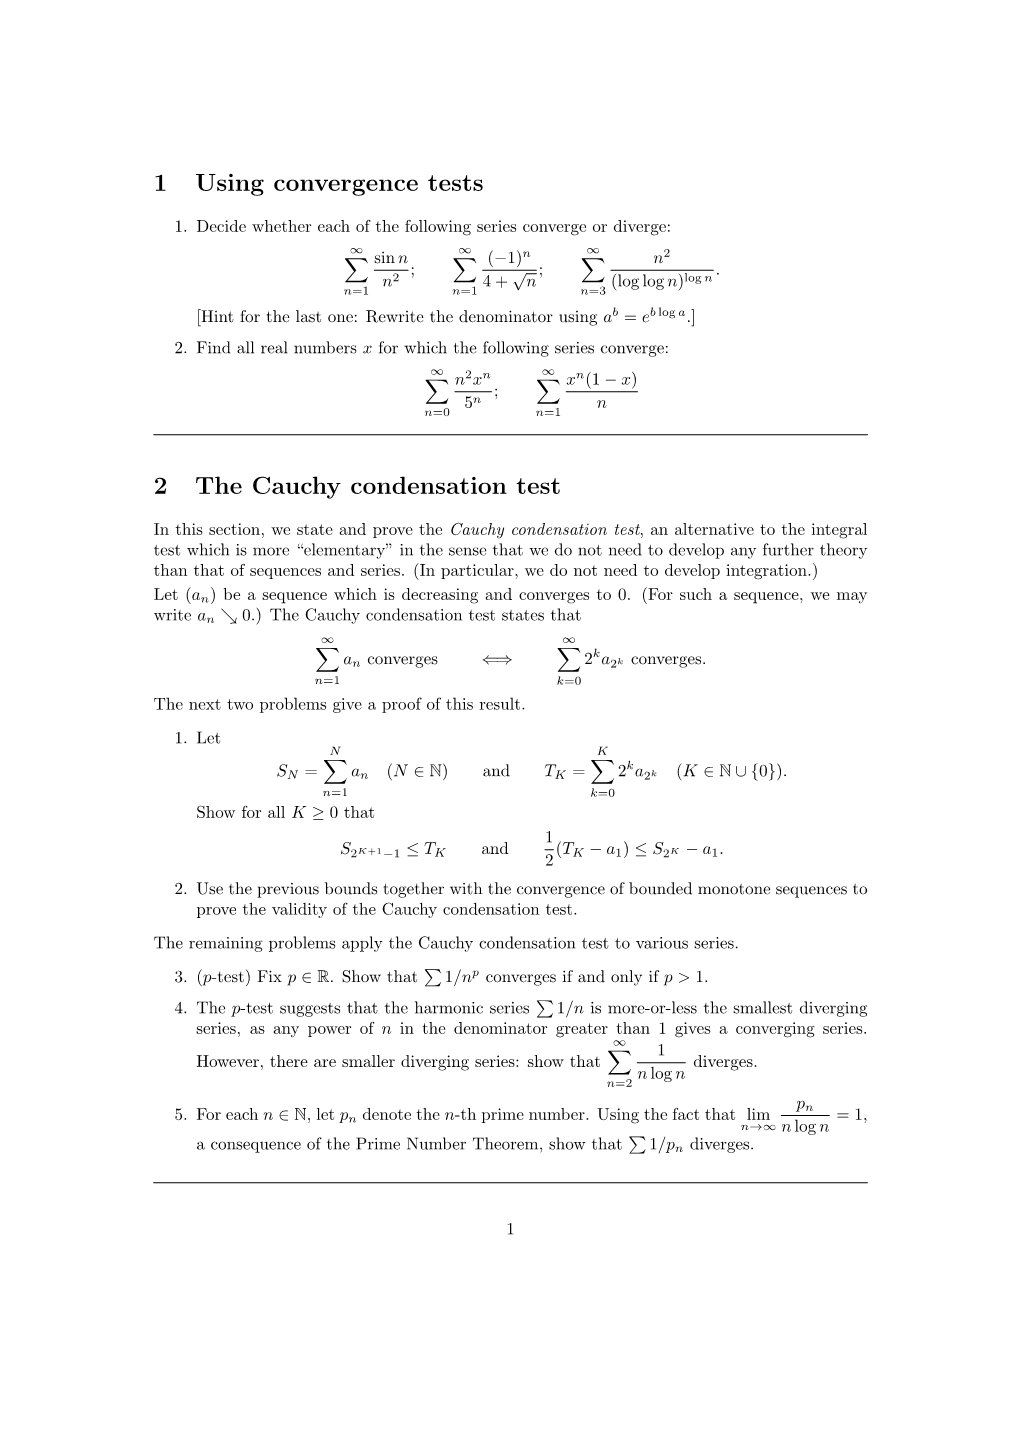 1 Using Convergence Tests 2 the Cauchy Condensation Test